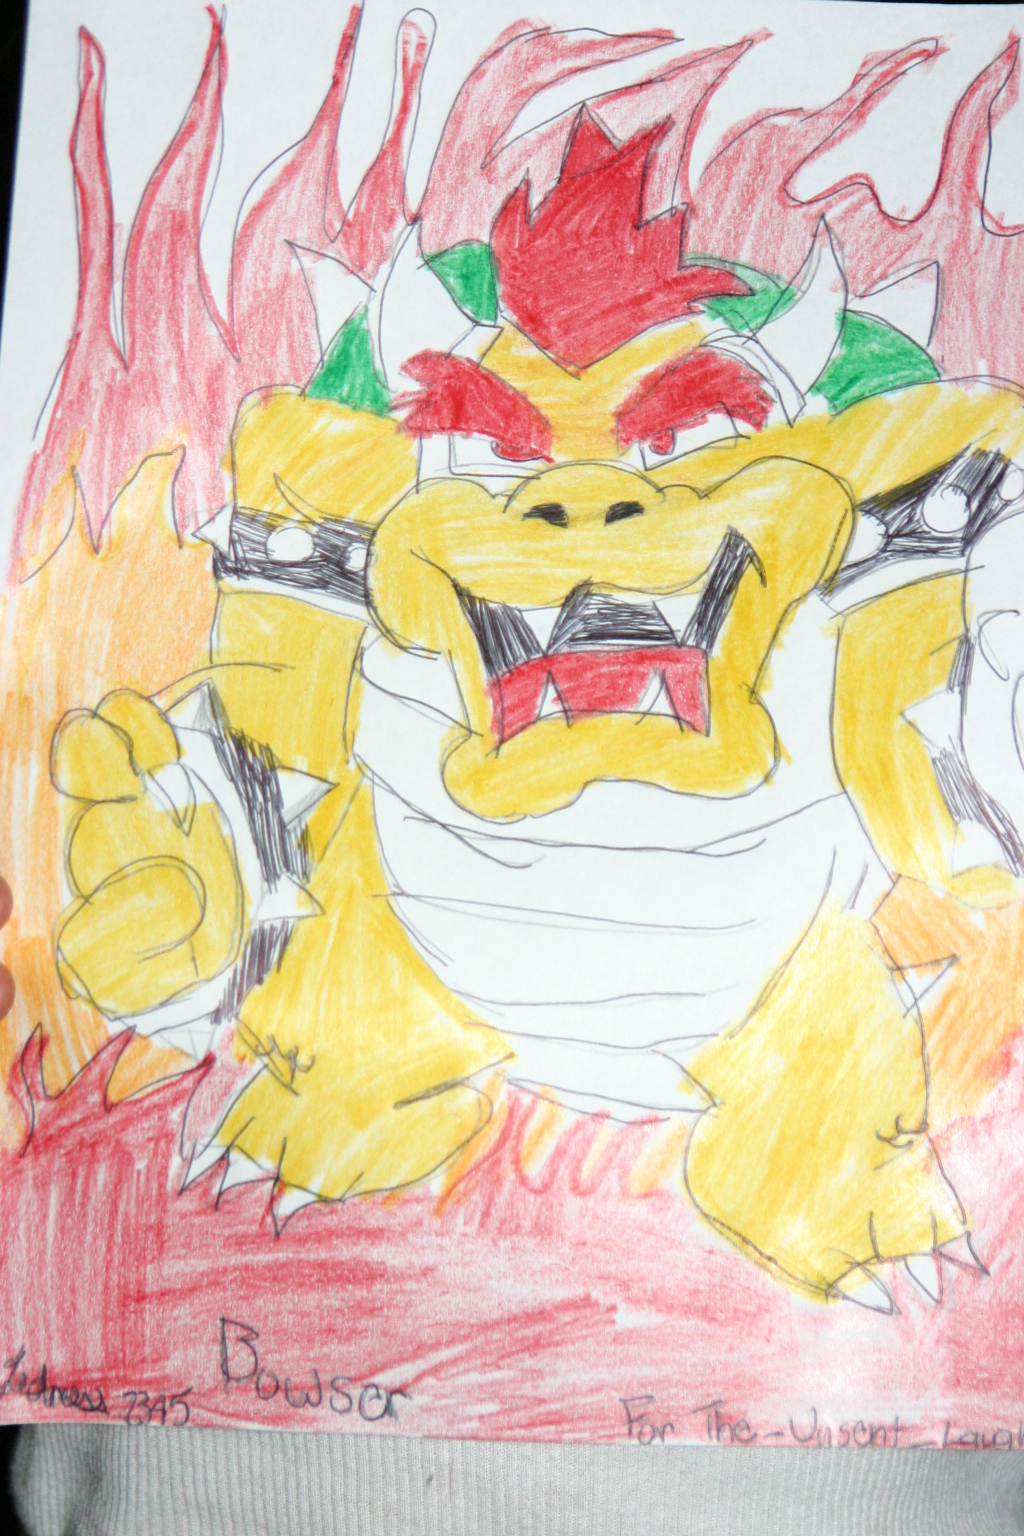 Kergo (aka Bowser) *Reqest For The_Unsent_Laugh by tedness2345